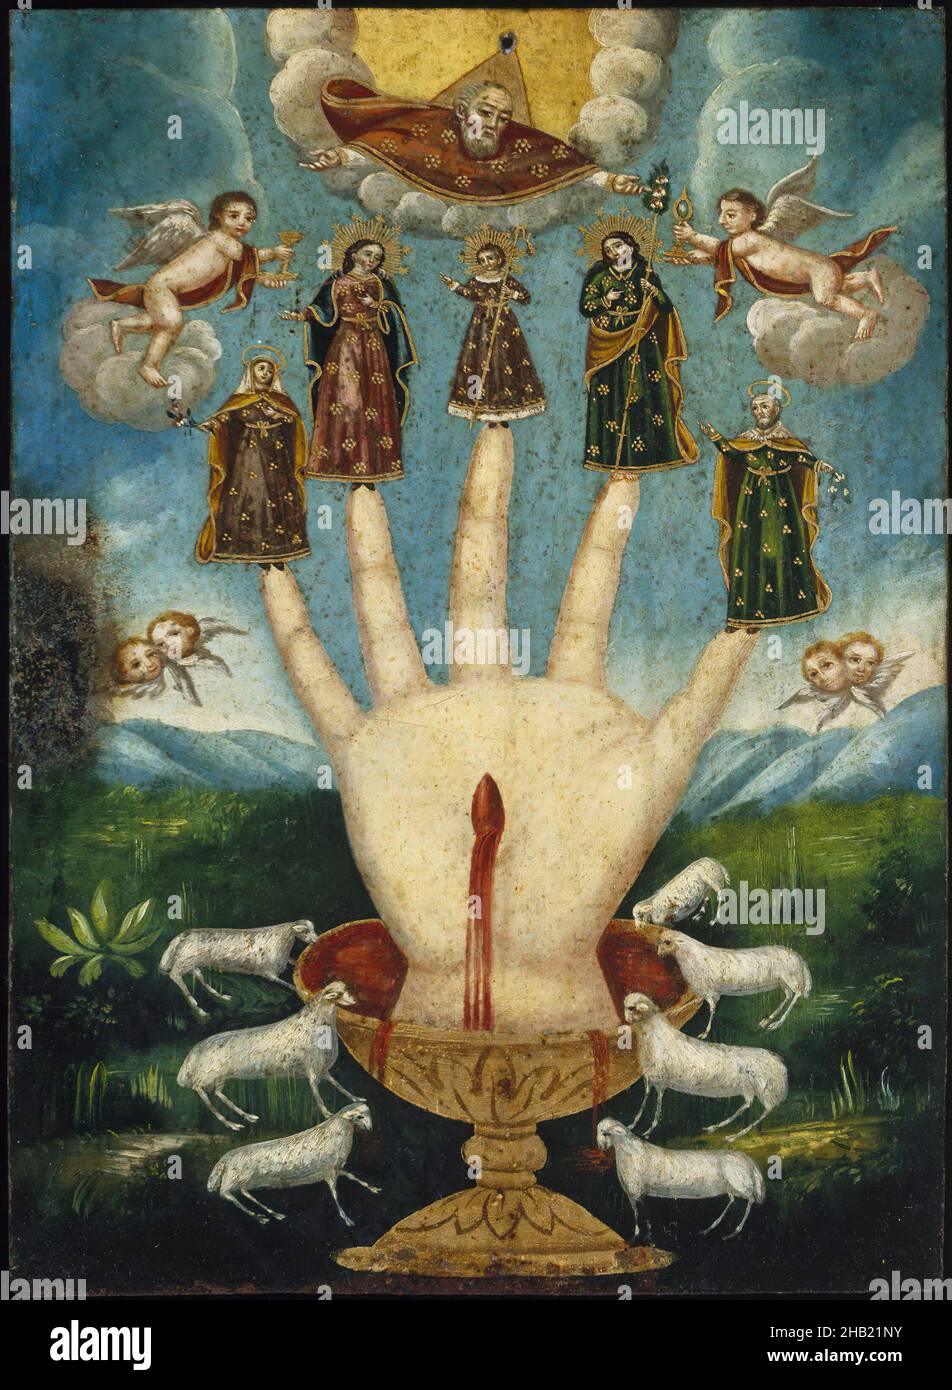 Mano Poderosa, The All-Powerful Hand, or Las Cinco Personas, The Five Persons, Mexican, Oil on metal, possibly tin-plated iron, Mexico, 19th century, 13 7/8 x 10 1/16in., 35.2 x 25.6cm, 19th Century, Angels, Anne, blood, celebration, chalice, cherubs, Christ, christianity, fingerpuppets, fingers, God, God the Father, hand, Hispanic, Hispanic Art, hispanic heritage, icons, Joachim, Joseph, lambs, latin american art, Mano, Mano poderosa, Mary, Metal, Mexican, Mexican Art, Mexican painting, Mexico, Native Mexican art, ndd12, Oil, Oil on Metal, Oil painting, painting, people, poderosa, religion Stock Photo